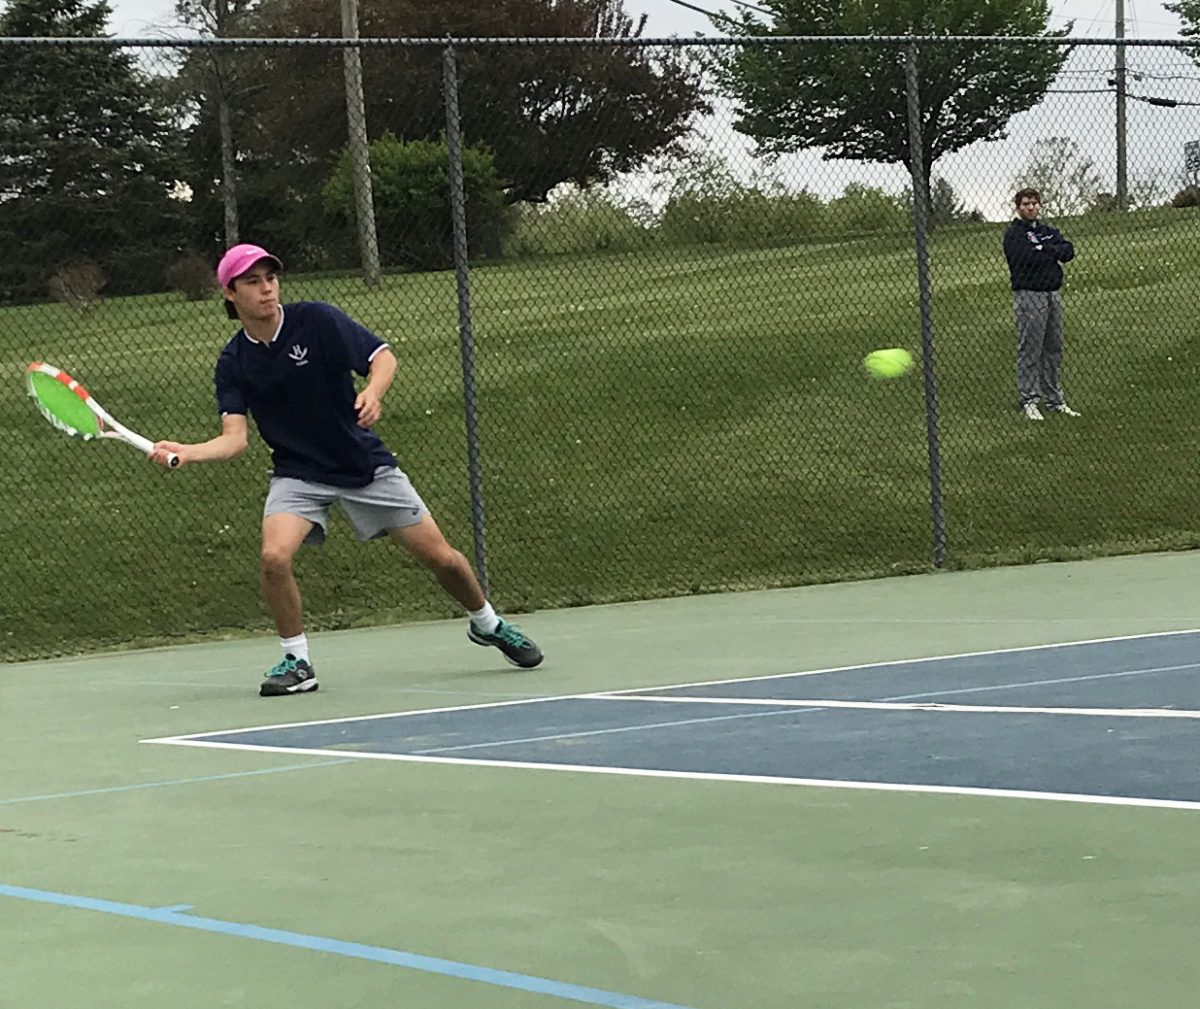 Julien Steins prepares to forehand the ball.